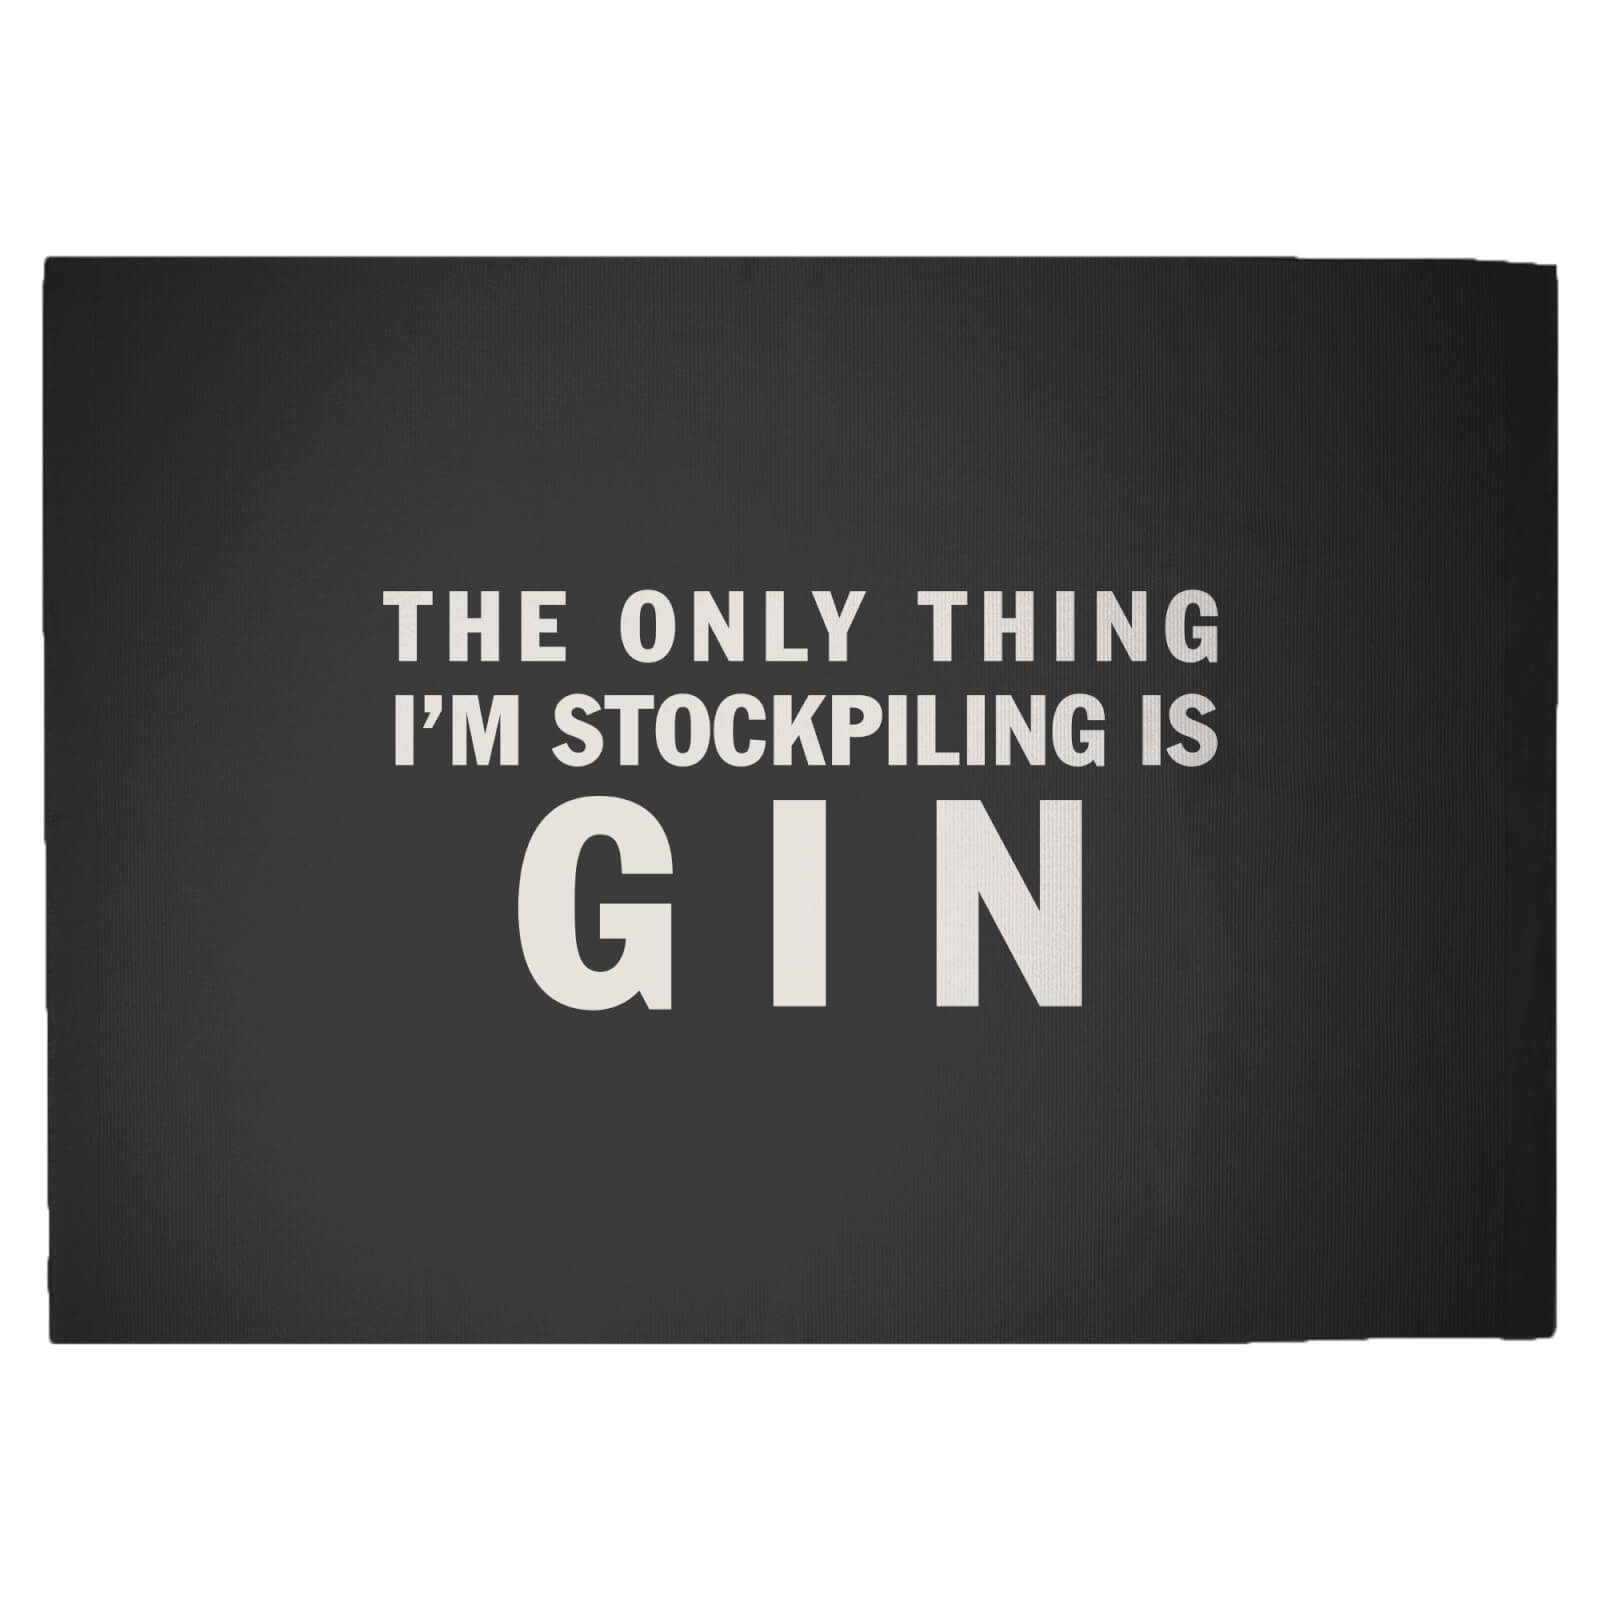 The Only Thing I'm Stockpiling Is Gin Woven Rug - Large